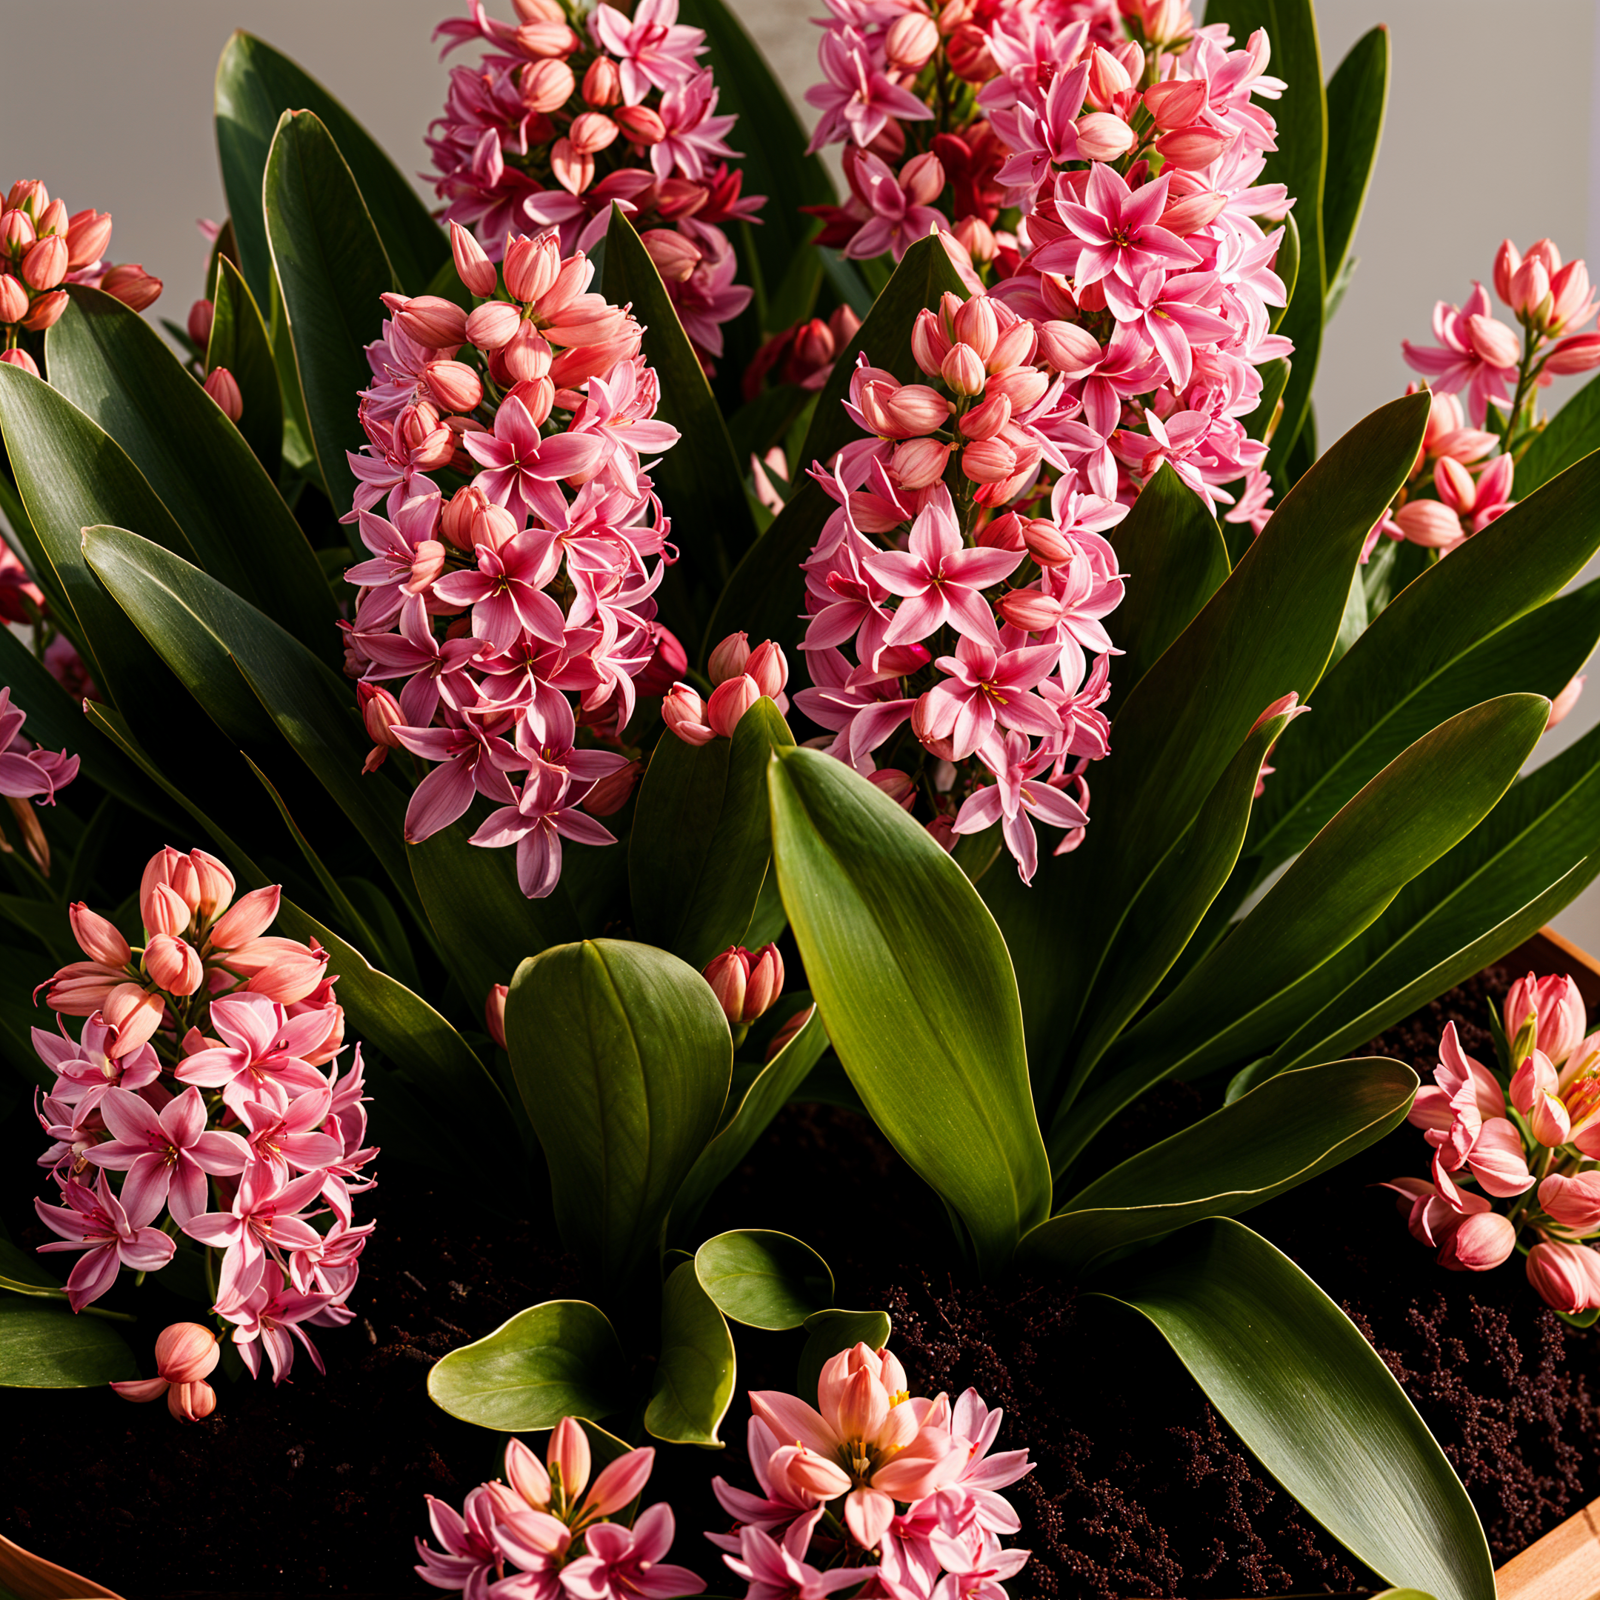 Hyacinthus orientalis in a planter, with a flower, under clear lighting against a dark background.